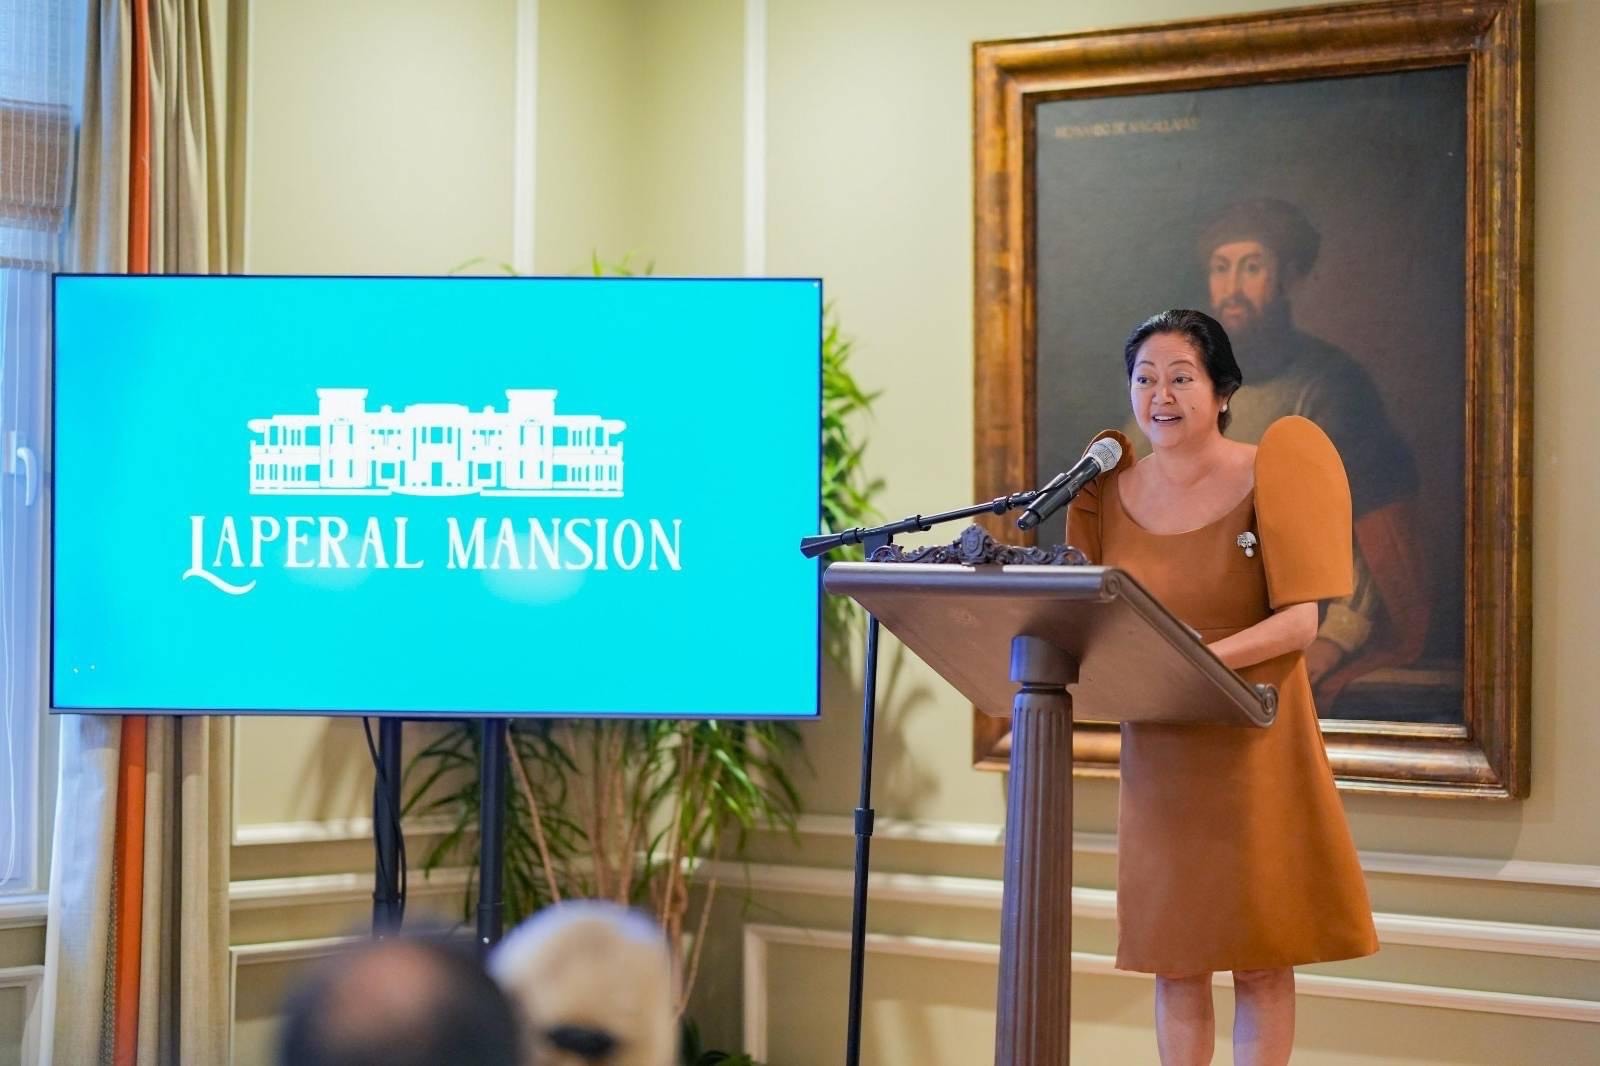 First Lady Liza shows glimpses of newly-refurbished Laperal Mansion in new video